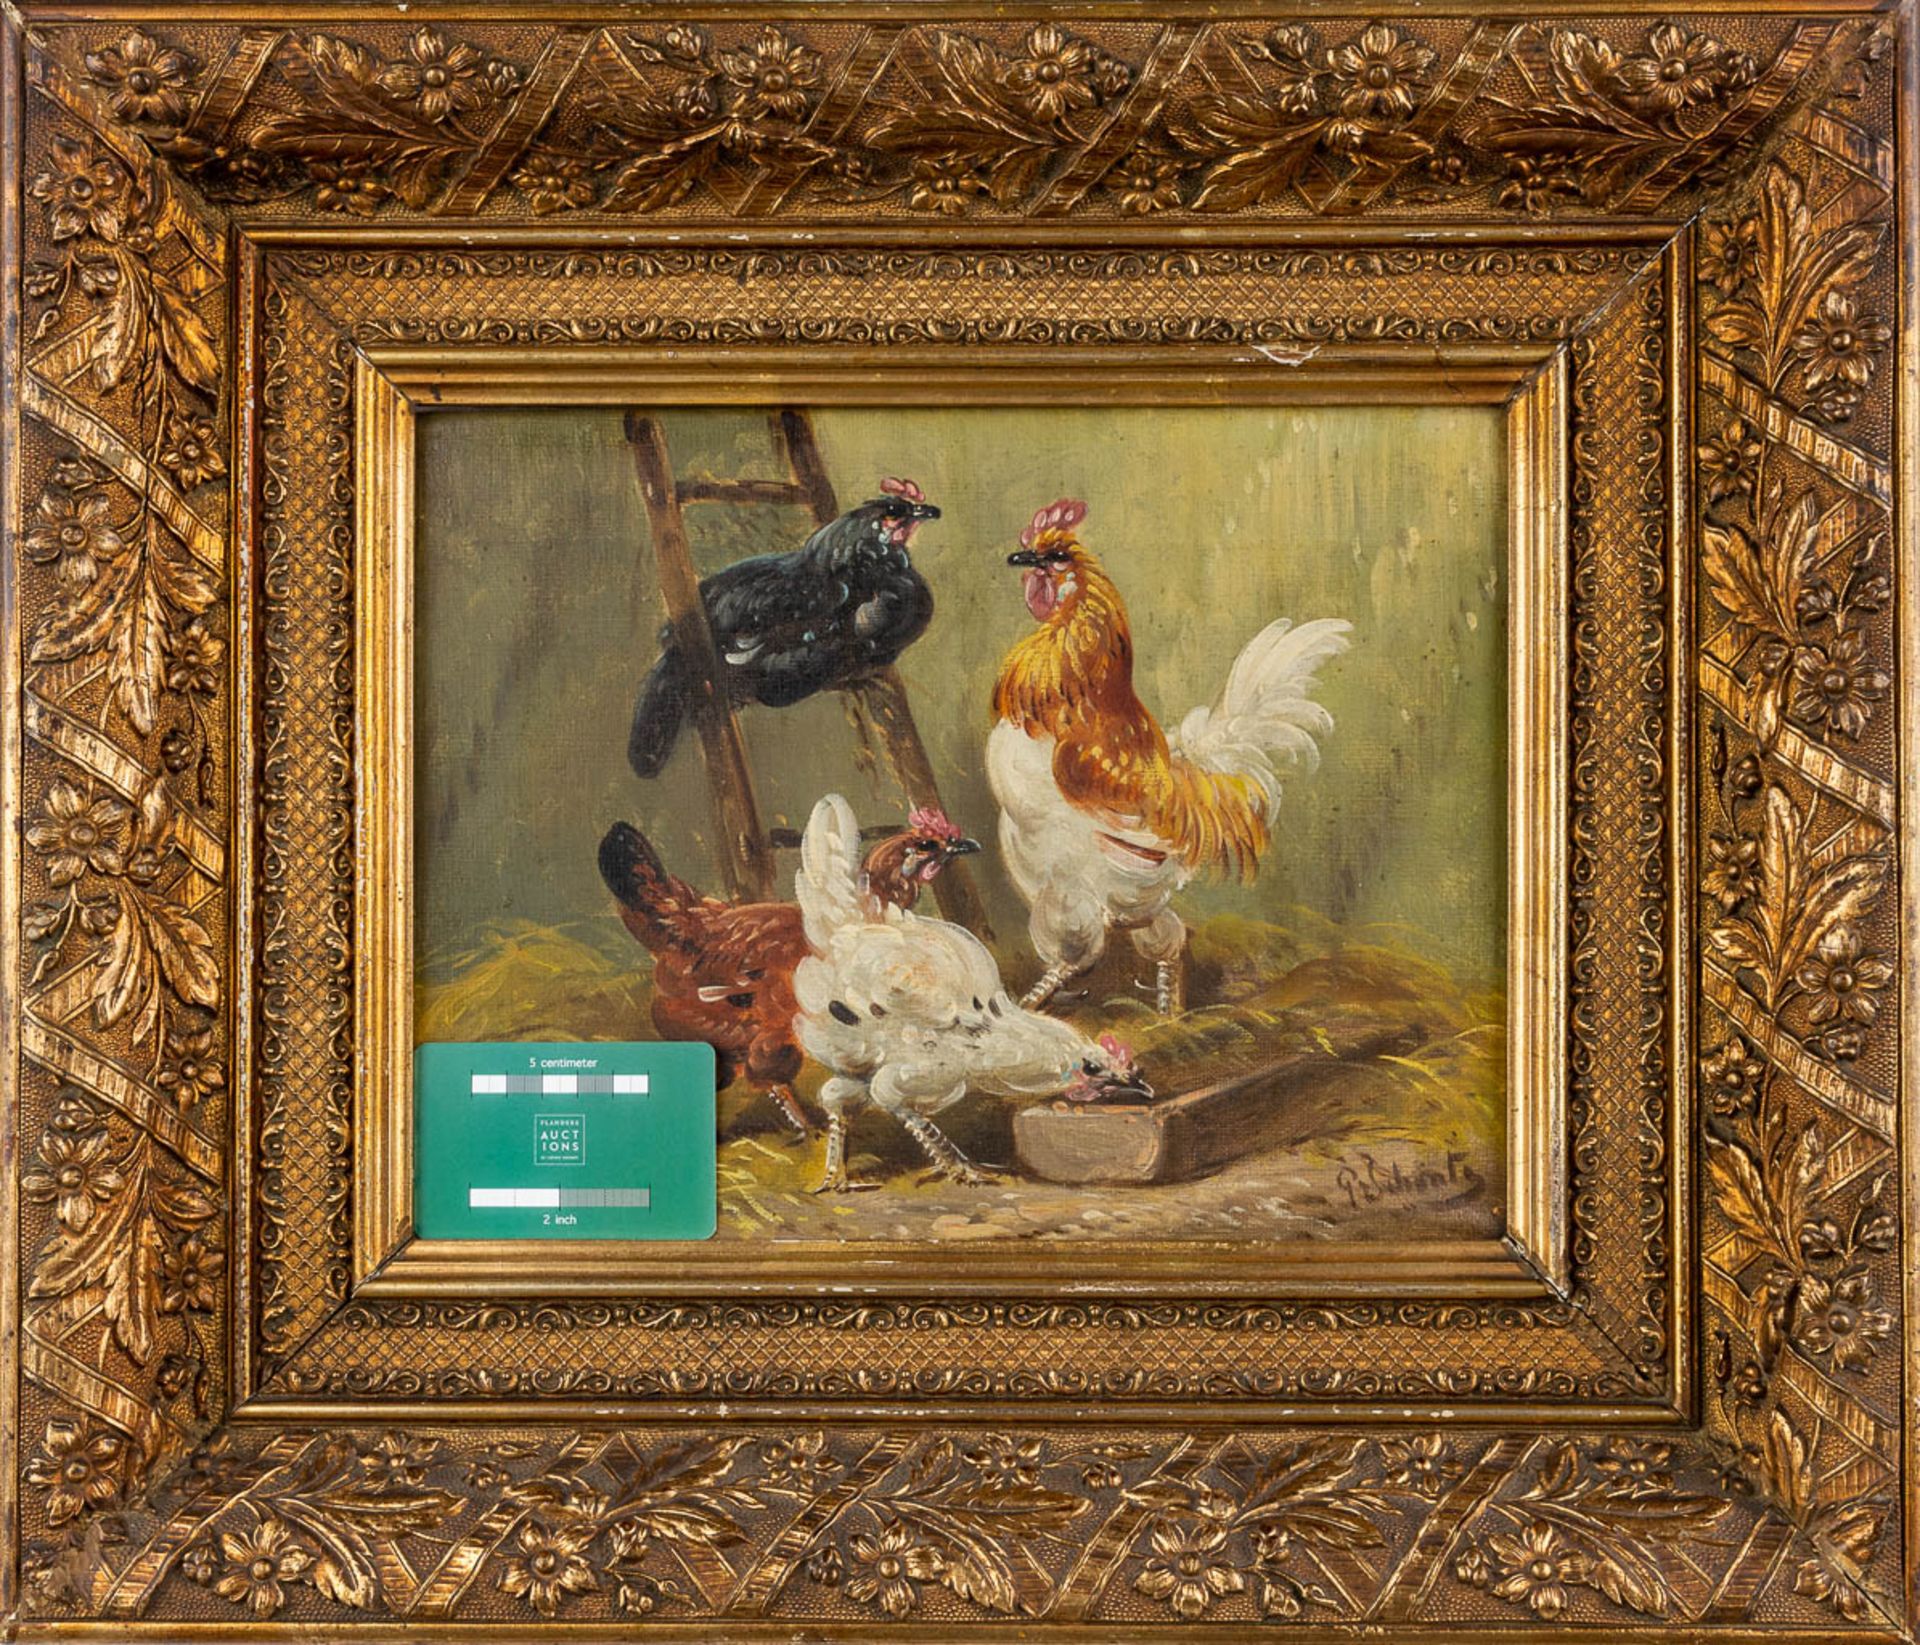 Paul SCHOUTEN (1860-1922) 'Chicken' a pair of pendant paintings, oil on canvas. (W:32,5 x H:24,5 cm) - Image 2 of 9